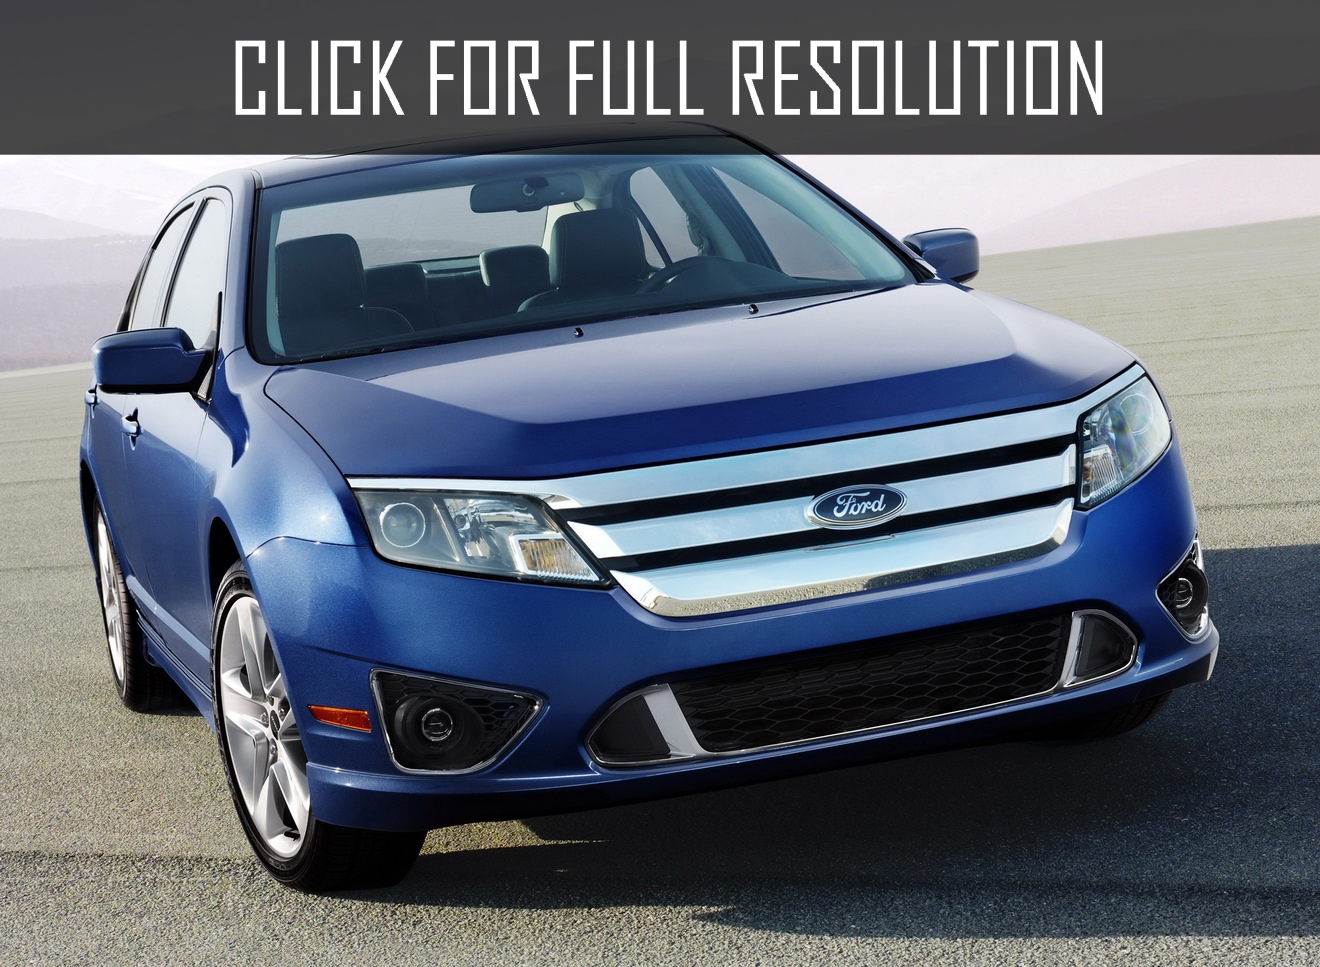 Ford Fusion 2010